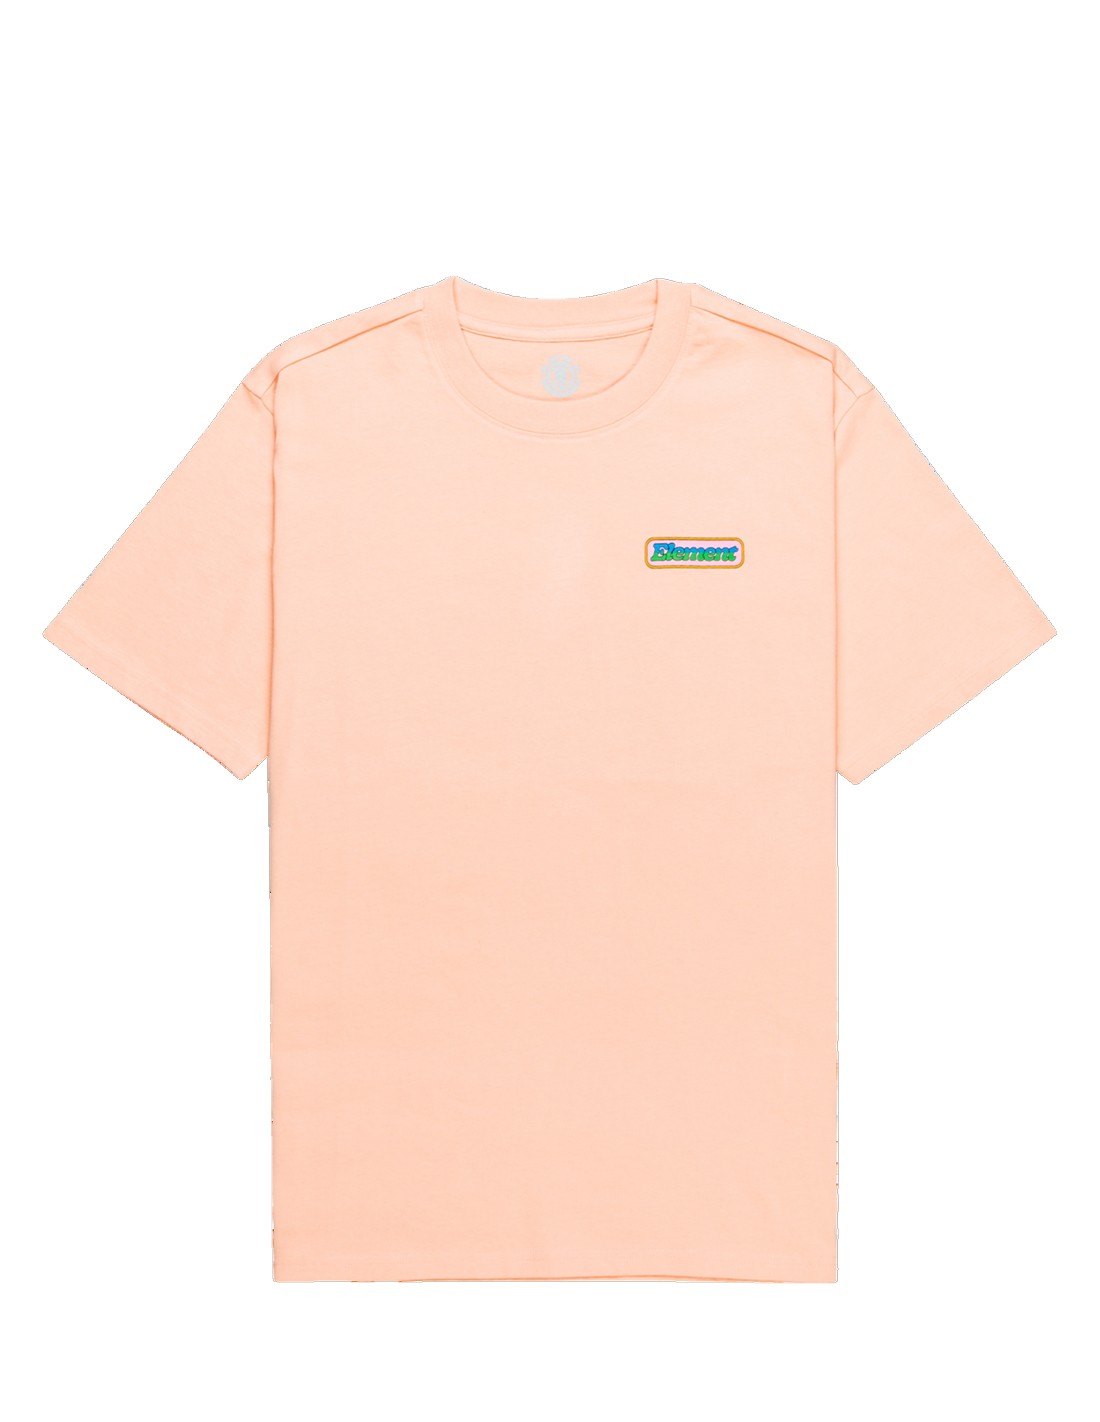 ELEMENT Reflections - Almost Apricot - T-shirt